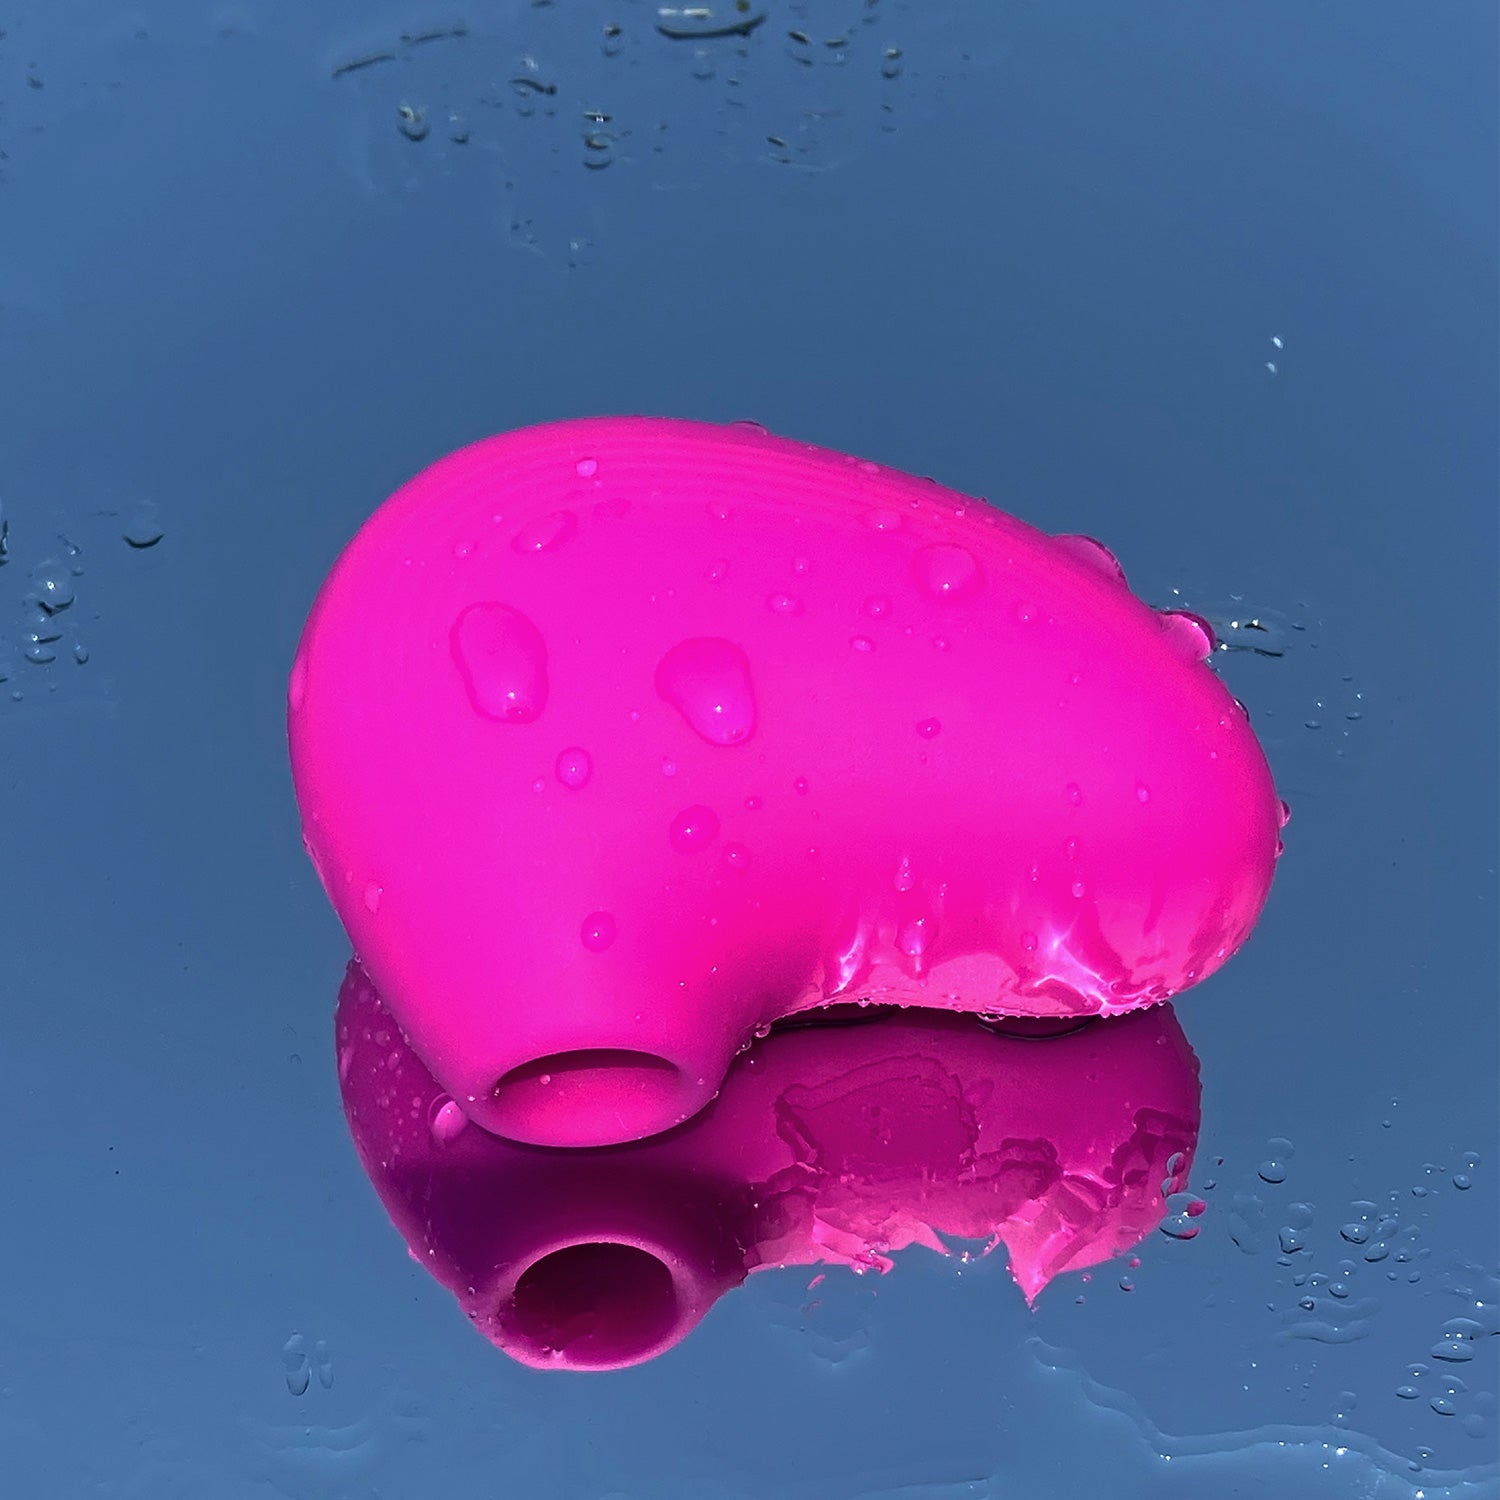 pink colored pocket-sized lit mini personal massager on wet surface